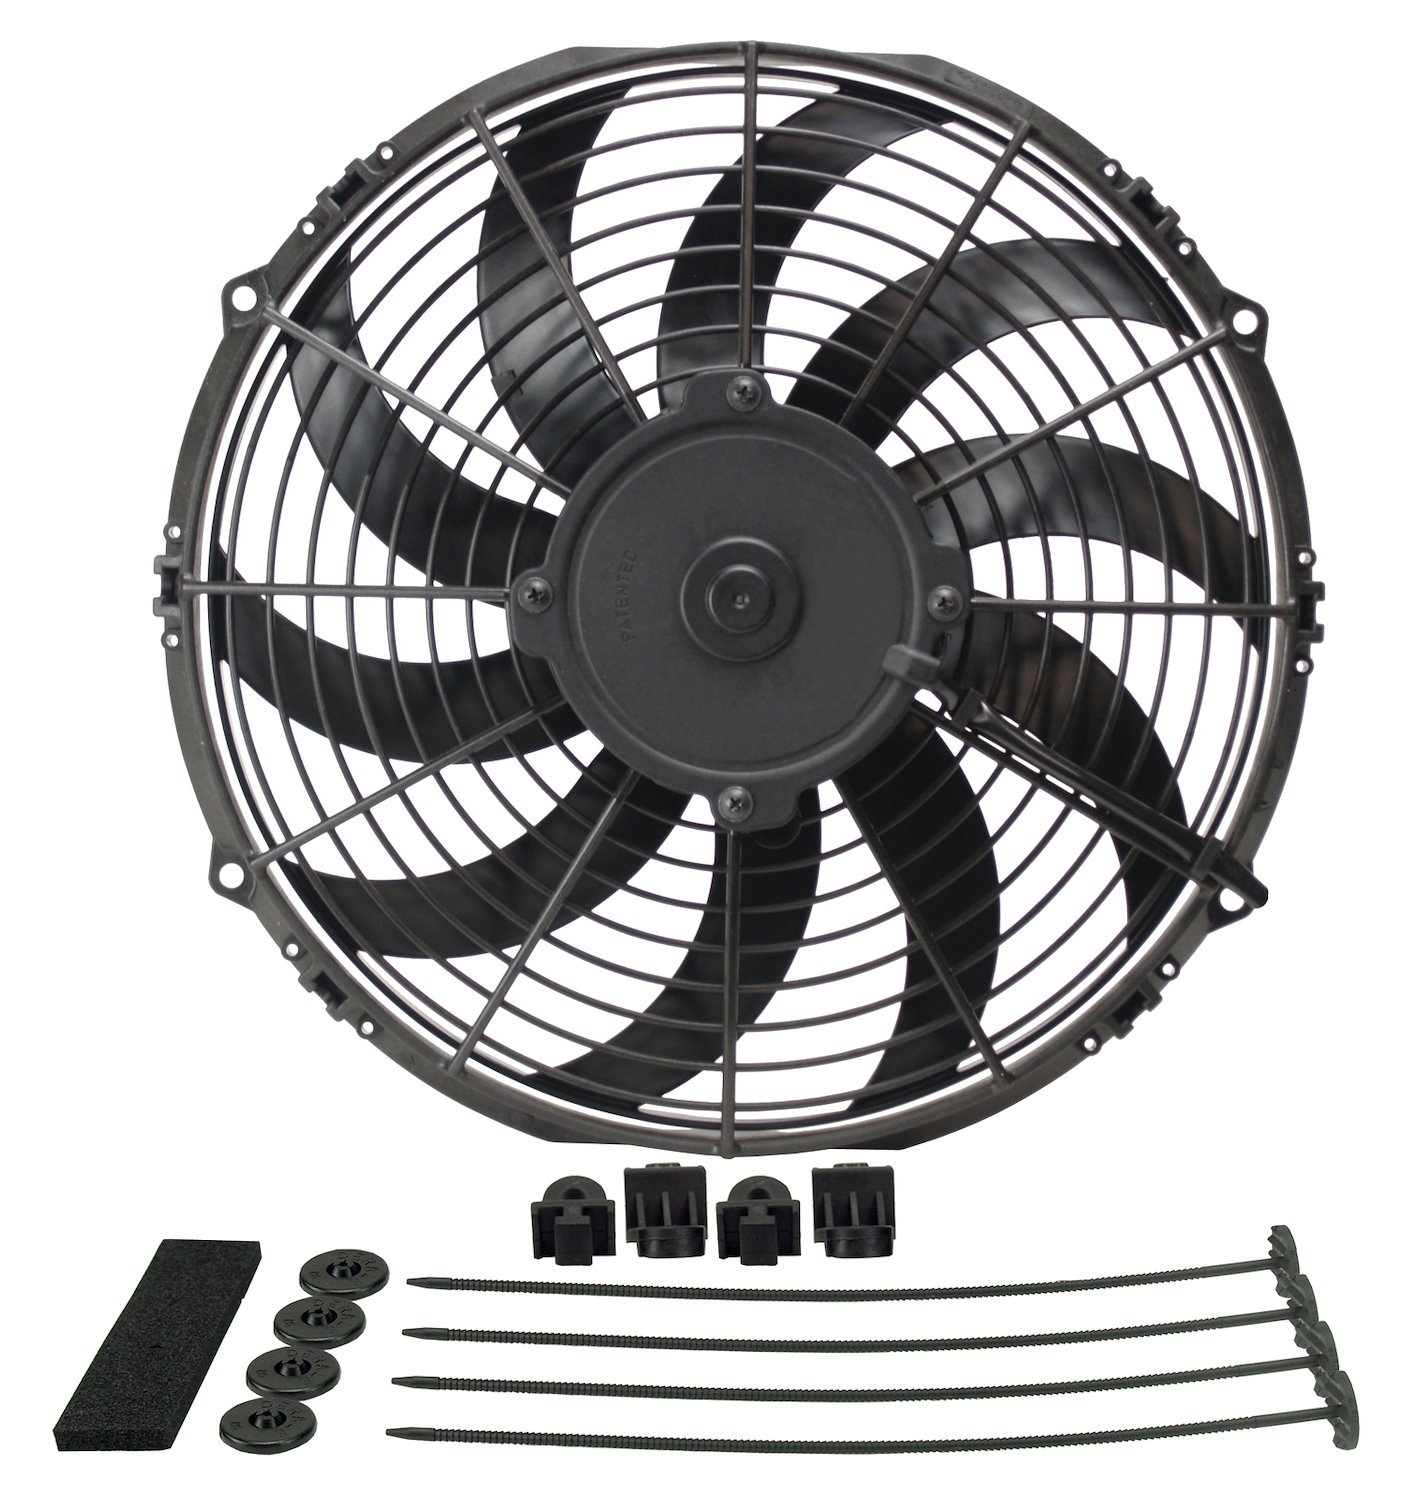 12" High-Output Extreme Ultra-Low Profile Waterproof/Dustproof Puller-Style Electric Fan 1328 CFM